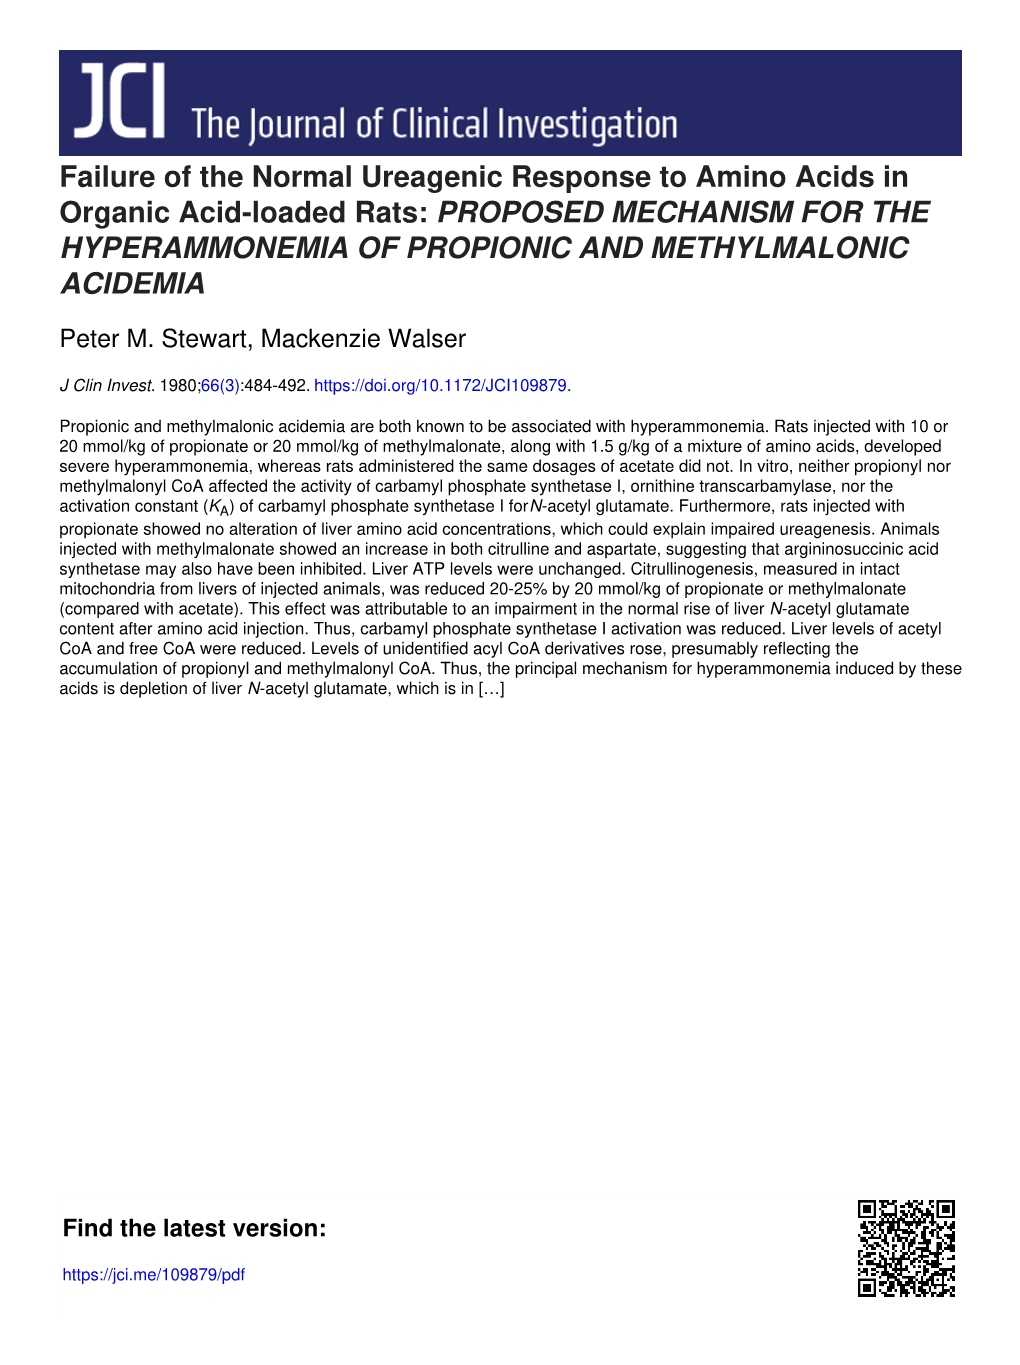 Failure of the Normal Ureagenic Response to Amino Acids in Organic Acid-Loaded Rats: PROPOSED MECHANISM for the HYPERAMMONEMIA of PROPIONIC and METHYLMALONIC ACIDEMIA